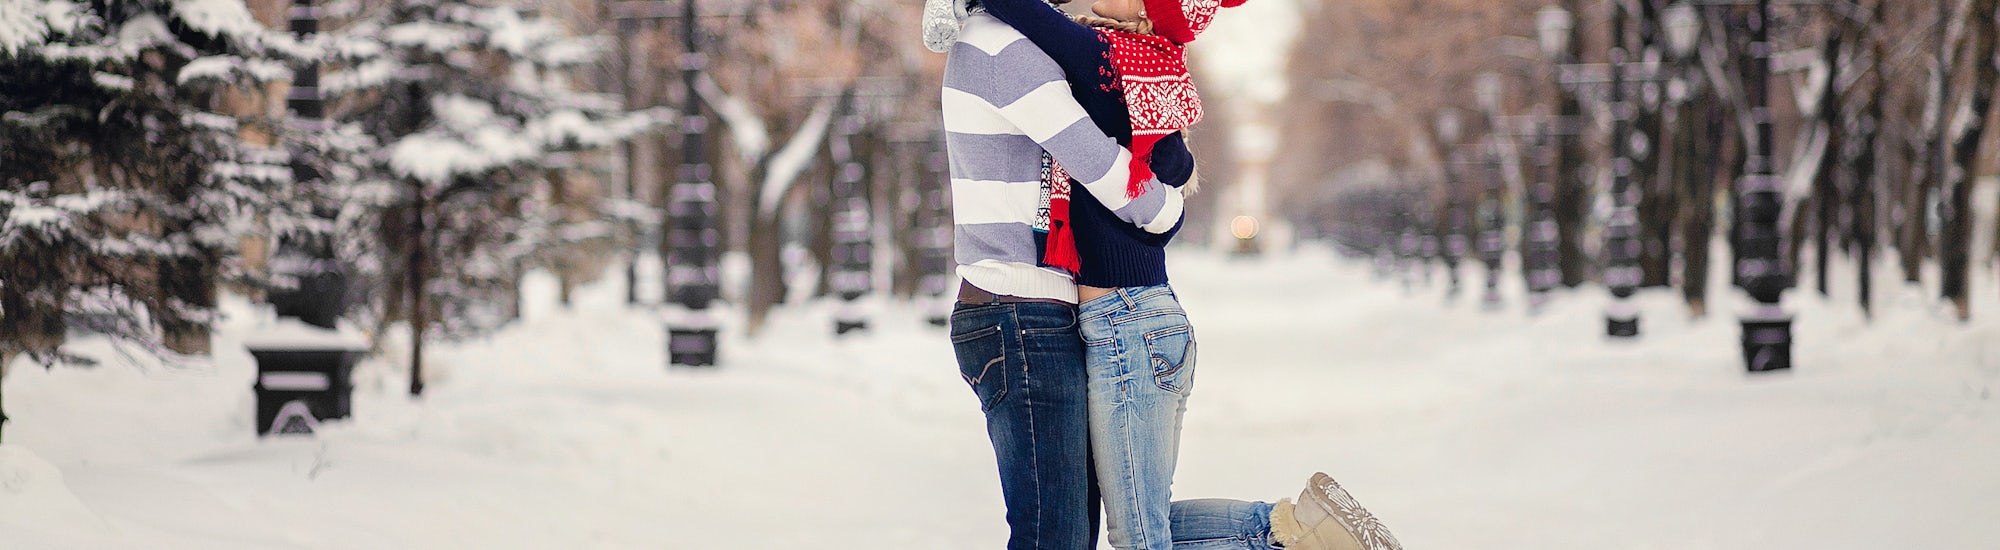 Couple Hugging in Snowy Forest